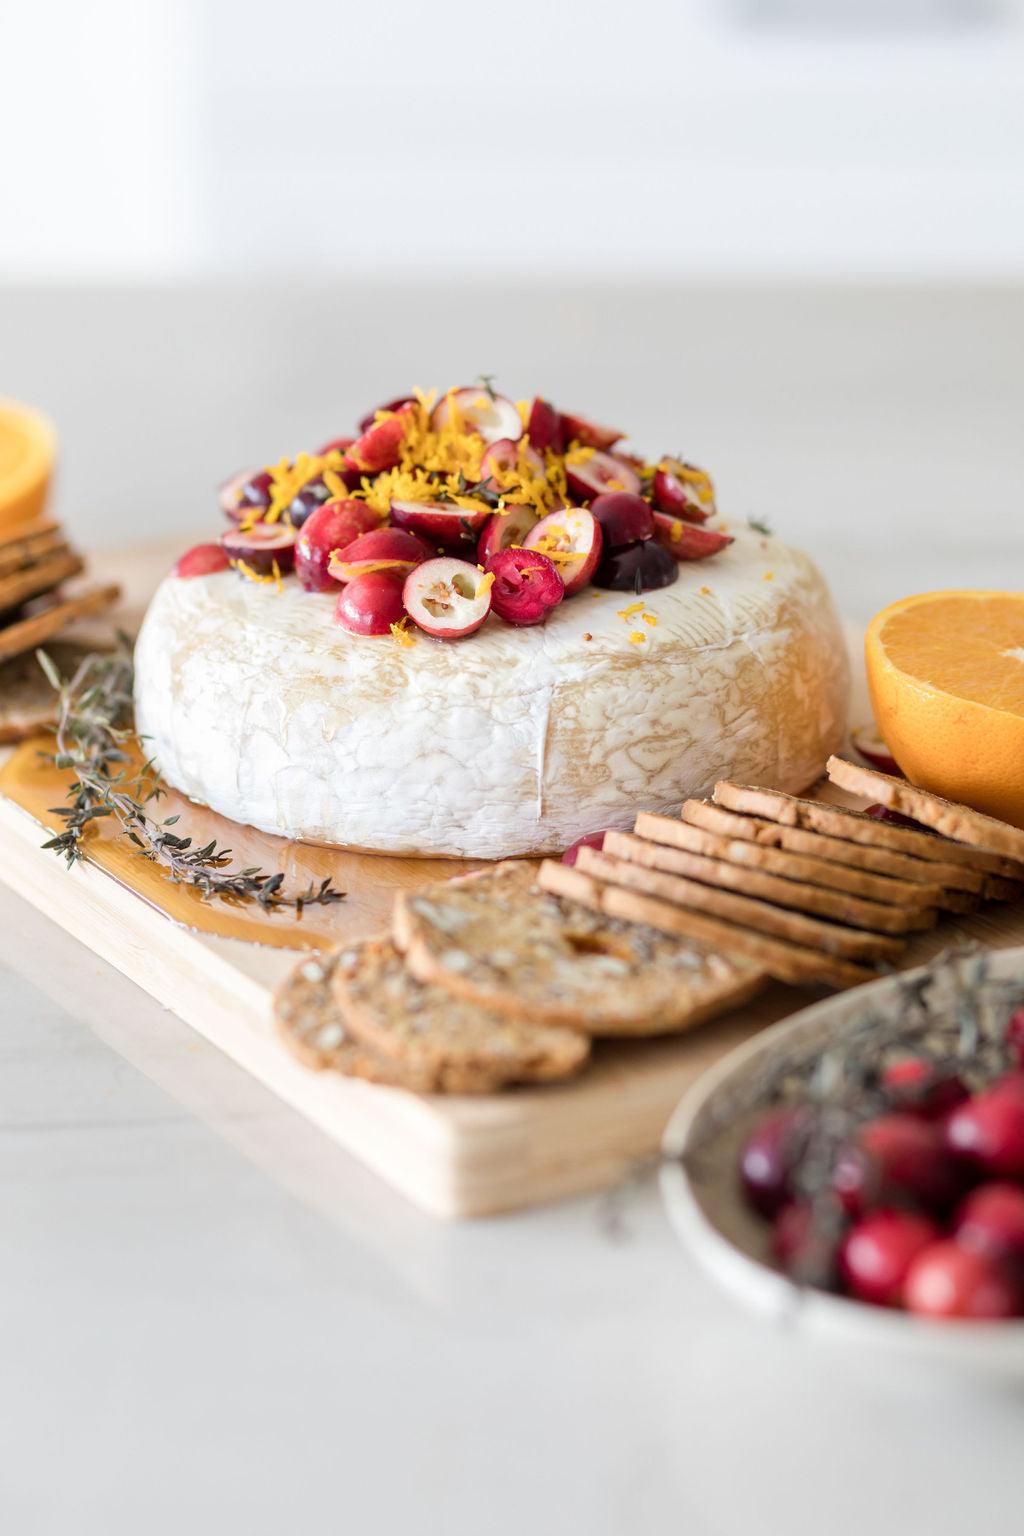 Citrus Cranberry Baked Brie Recipe - Easy to Make Appetizer